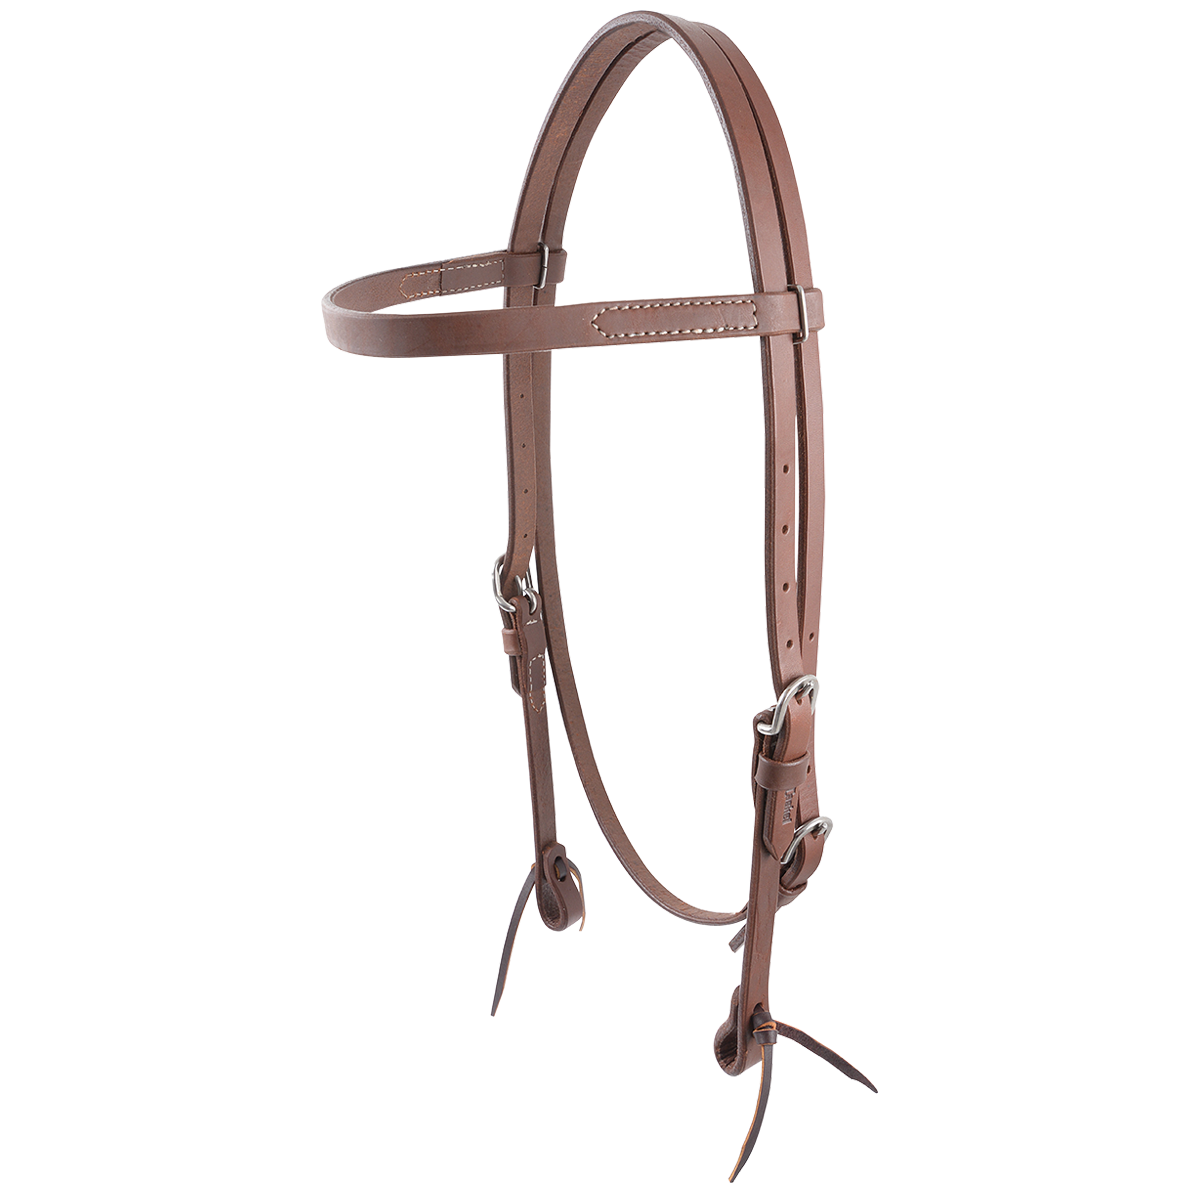 HARNESS BROWBAND HEADSTALL